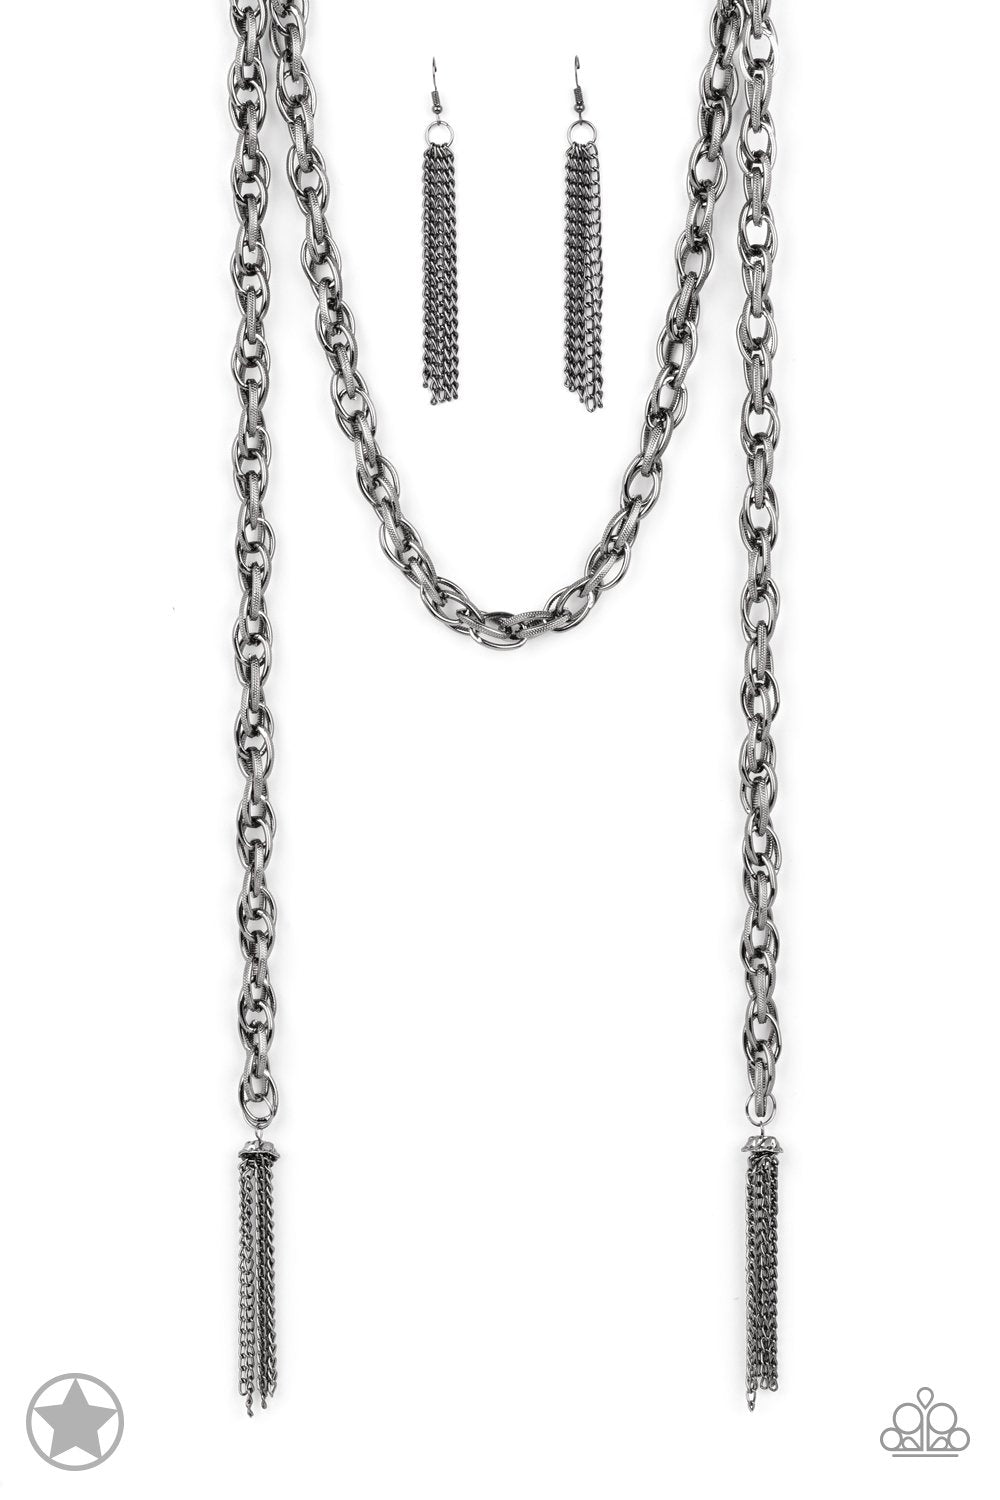 Scarfed for Attention Gunmetal Chain Necklace and matching Earrings - Paparazzi Accessories - lightbox -CarasShop.com - $5 Jewelry by Cara Jewels